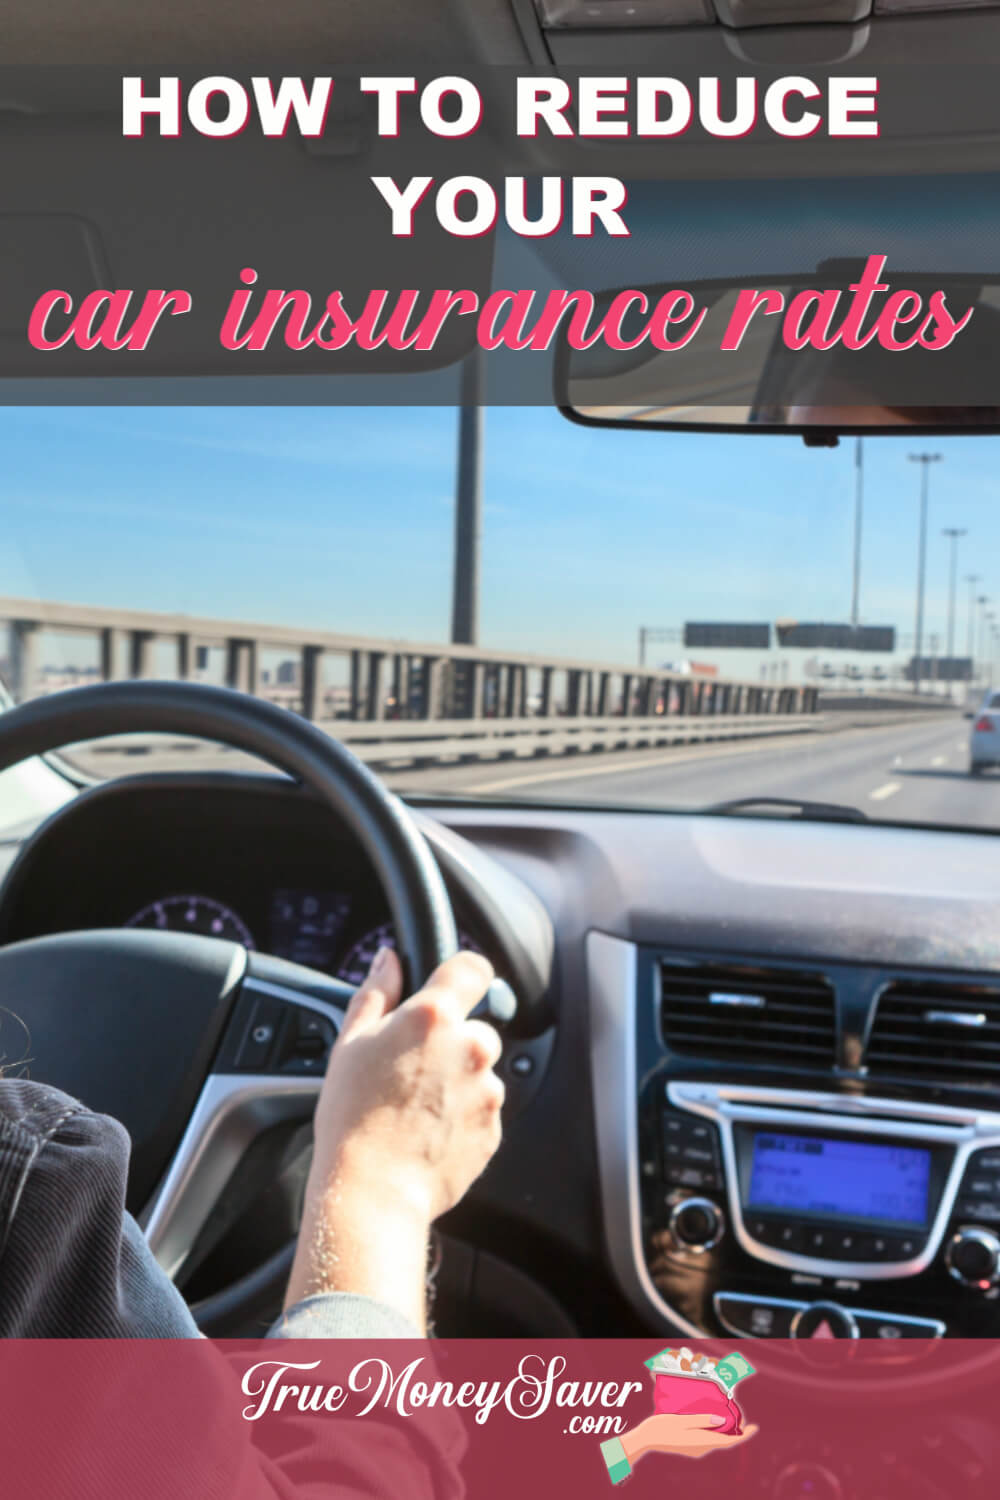 How To Reduce Your Car Insurance Rates